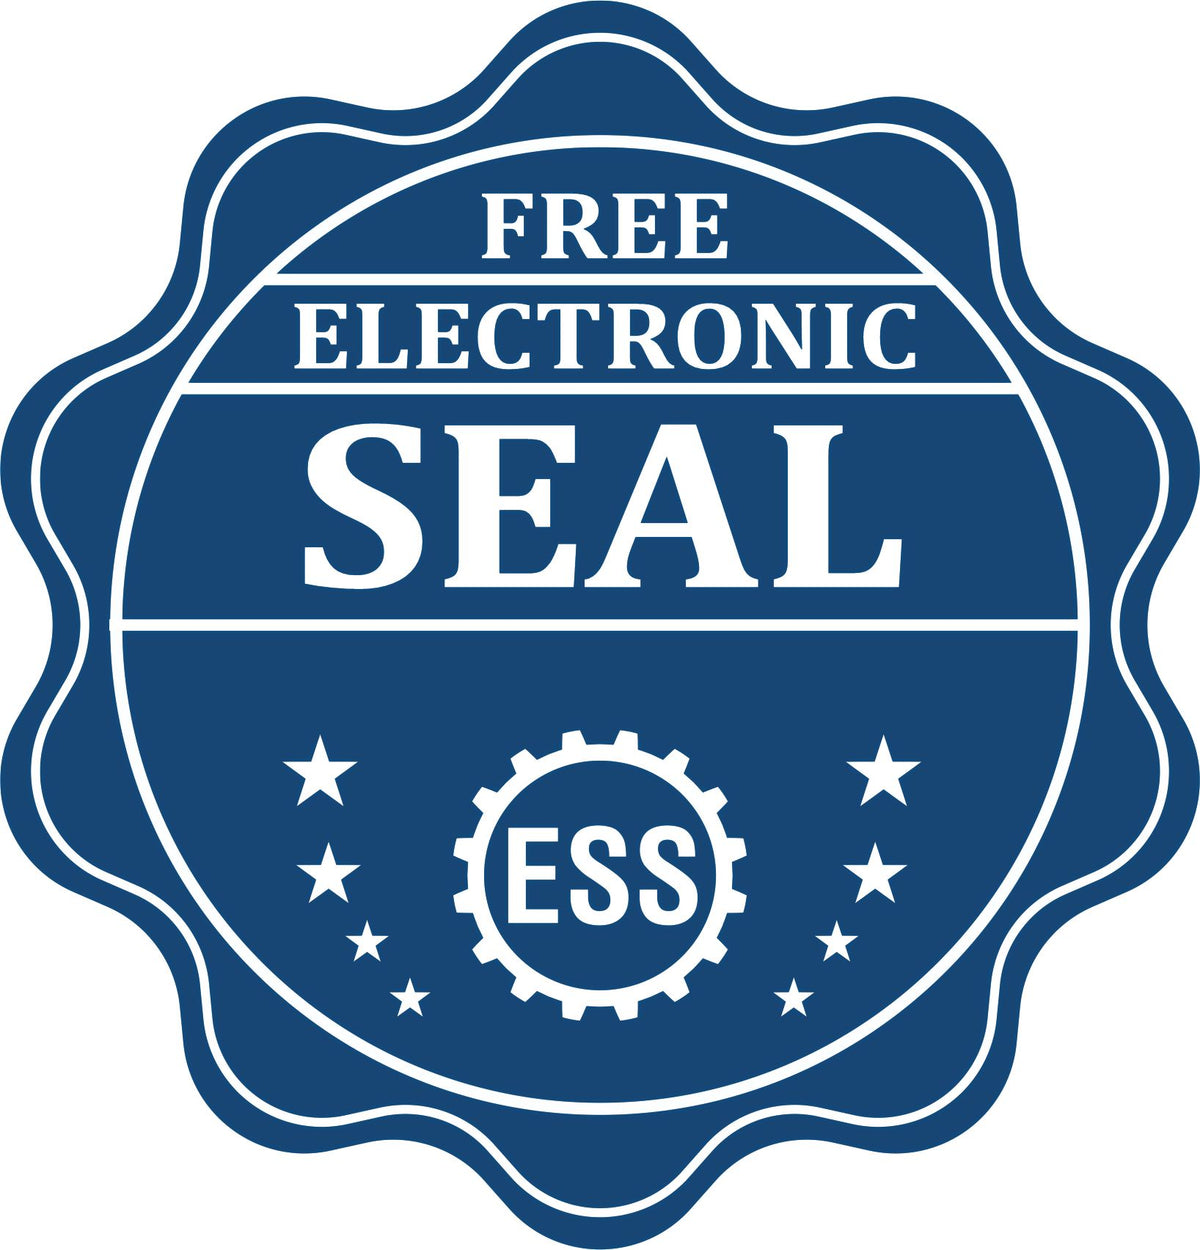 A badge showing a free electronic seal for the Soft Pocket Vermont Landscape Architect Embosser with stars and the ESS gear on the emblem.